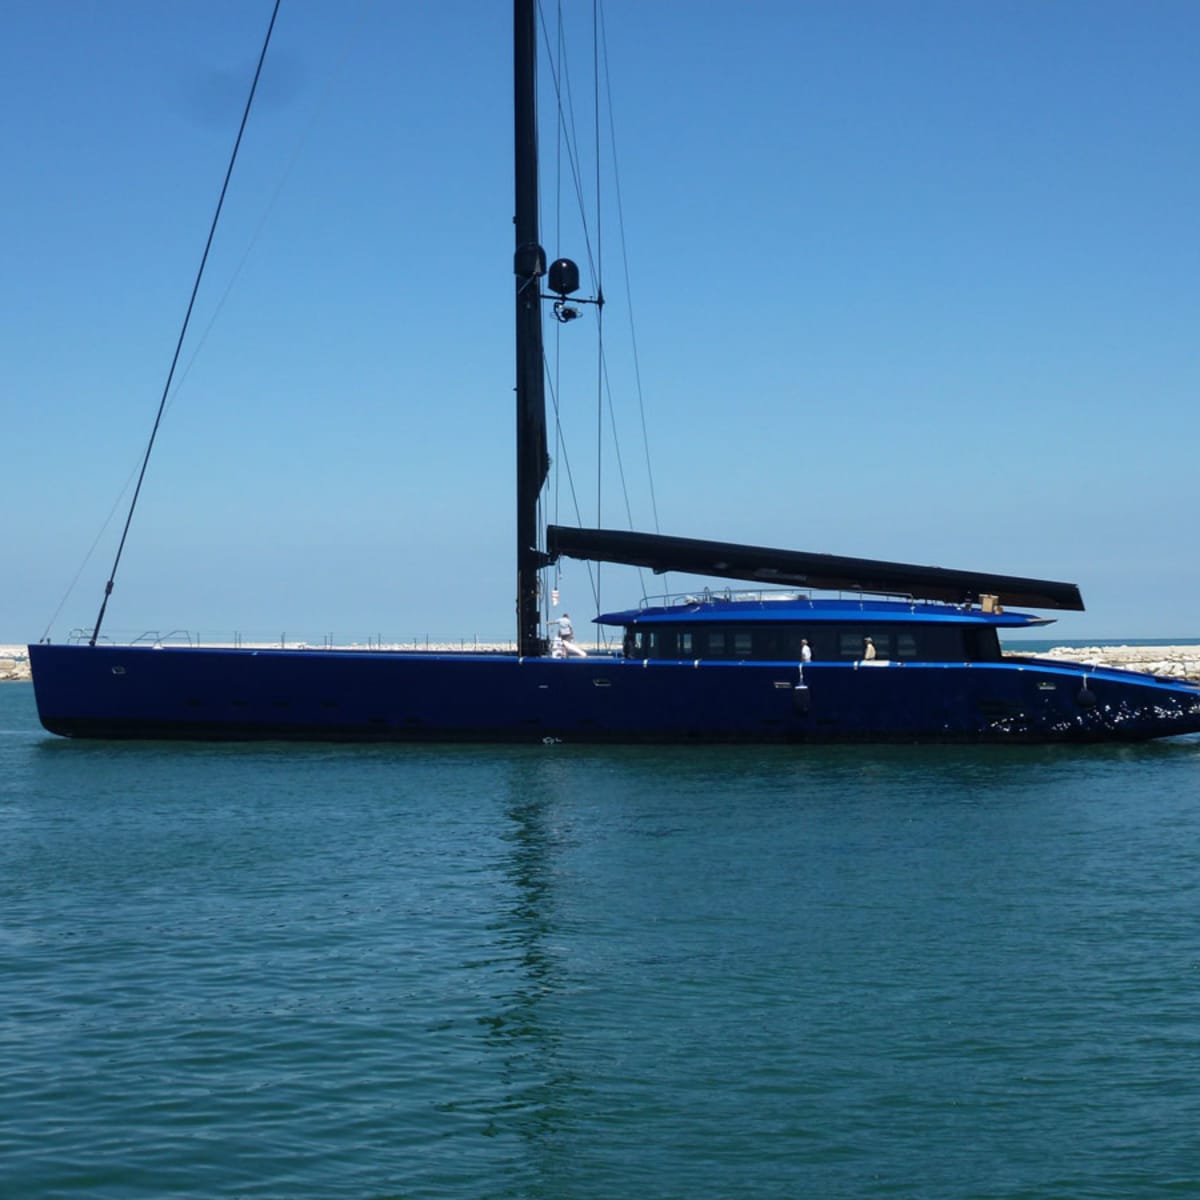 Wallys carbon-fiber sail yacht better place israel dark ethereal being